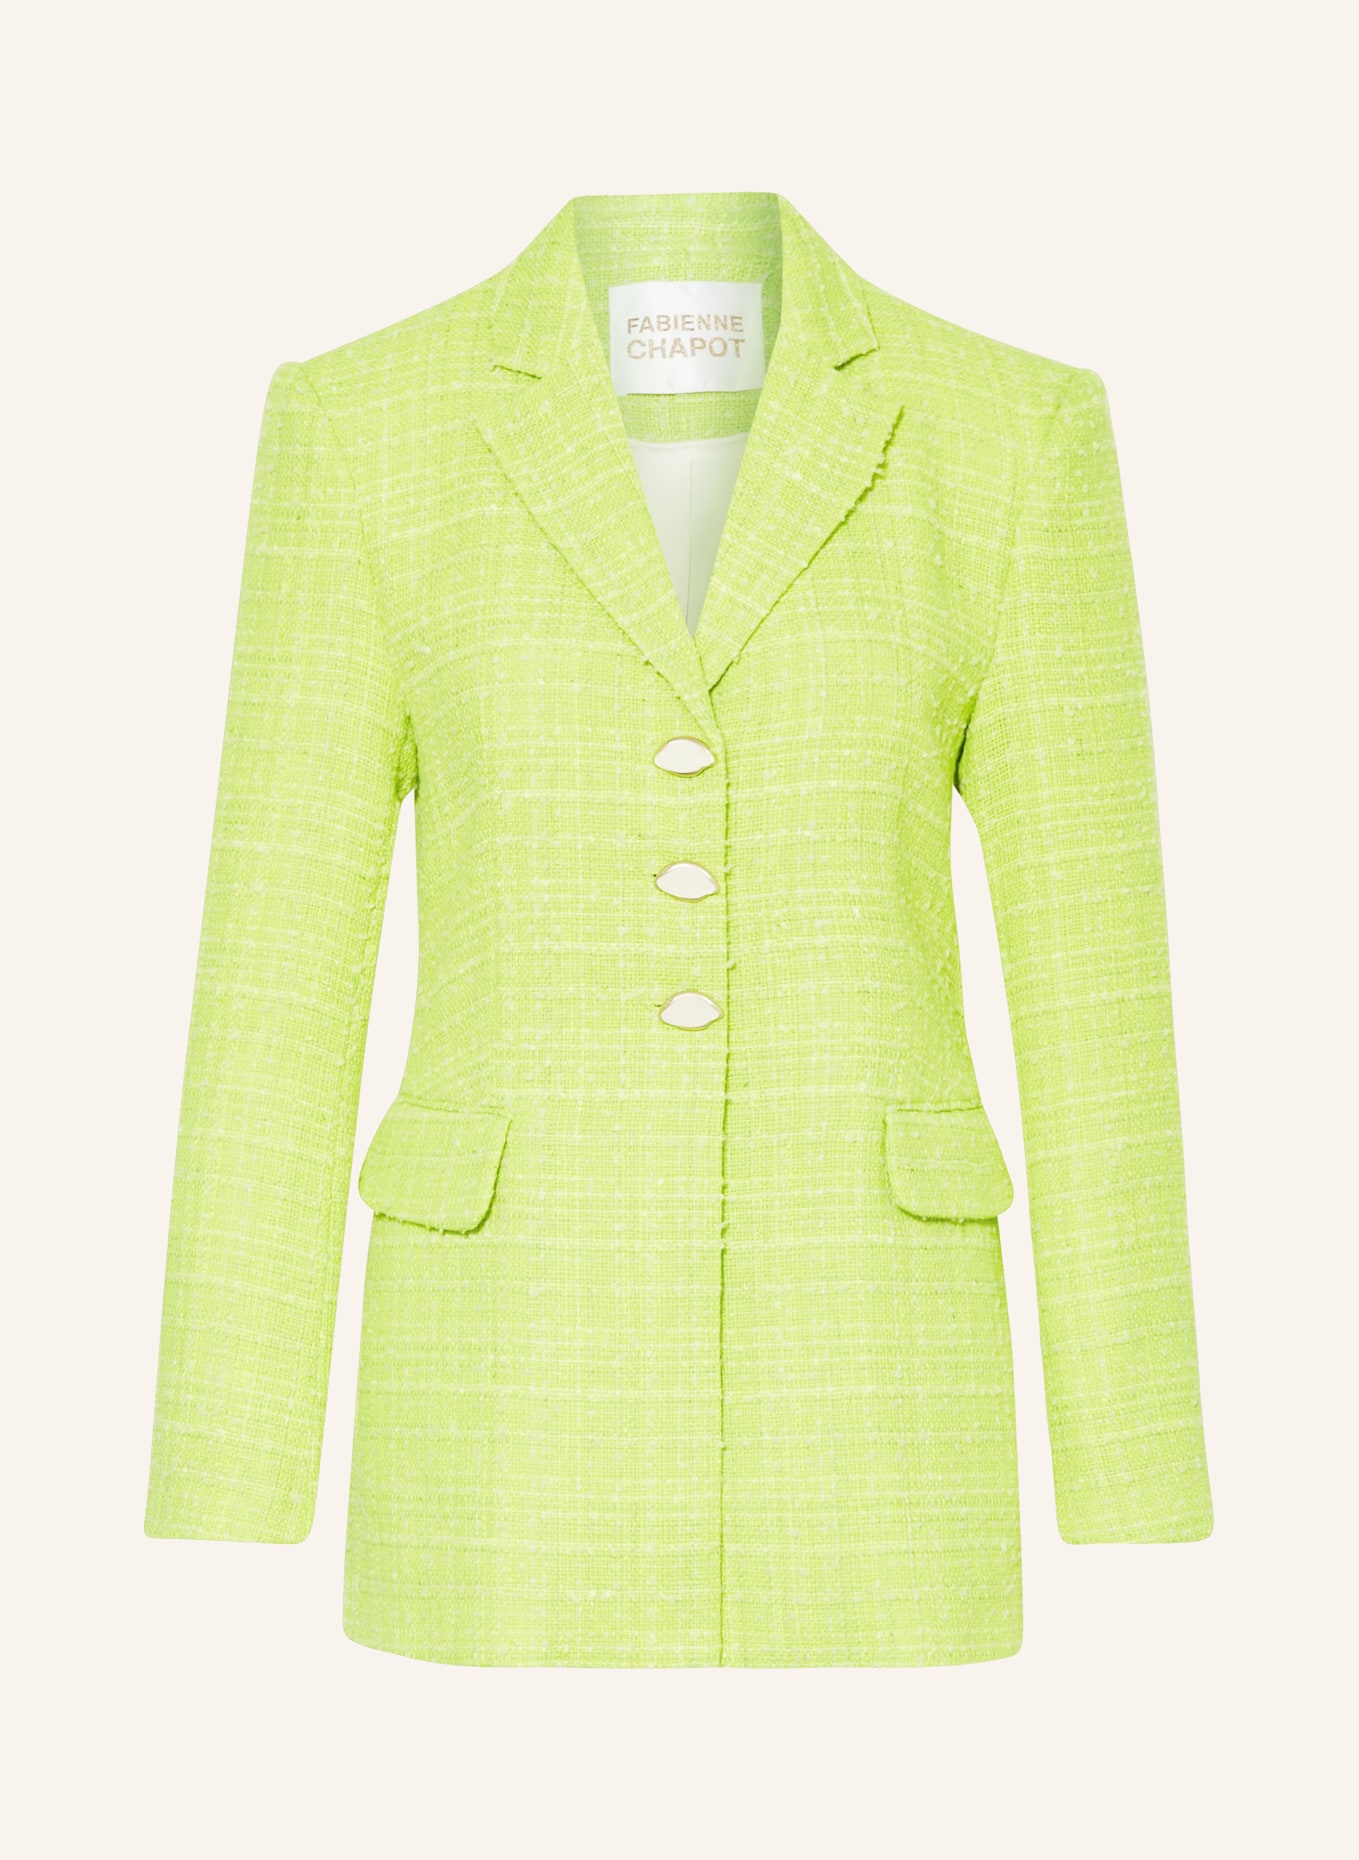 FABIENNE CHAPOT Tweed blazer CHER, Color: 4011 Lovely Lime (Image 1)